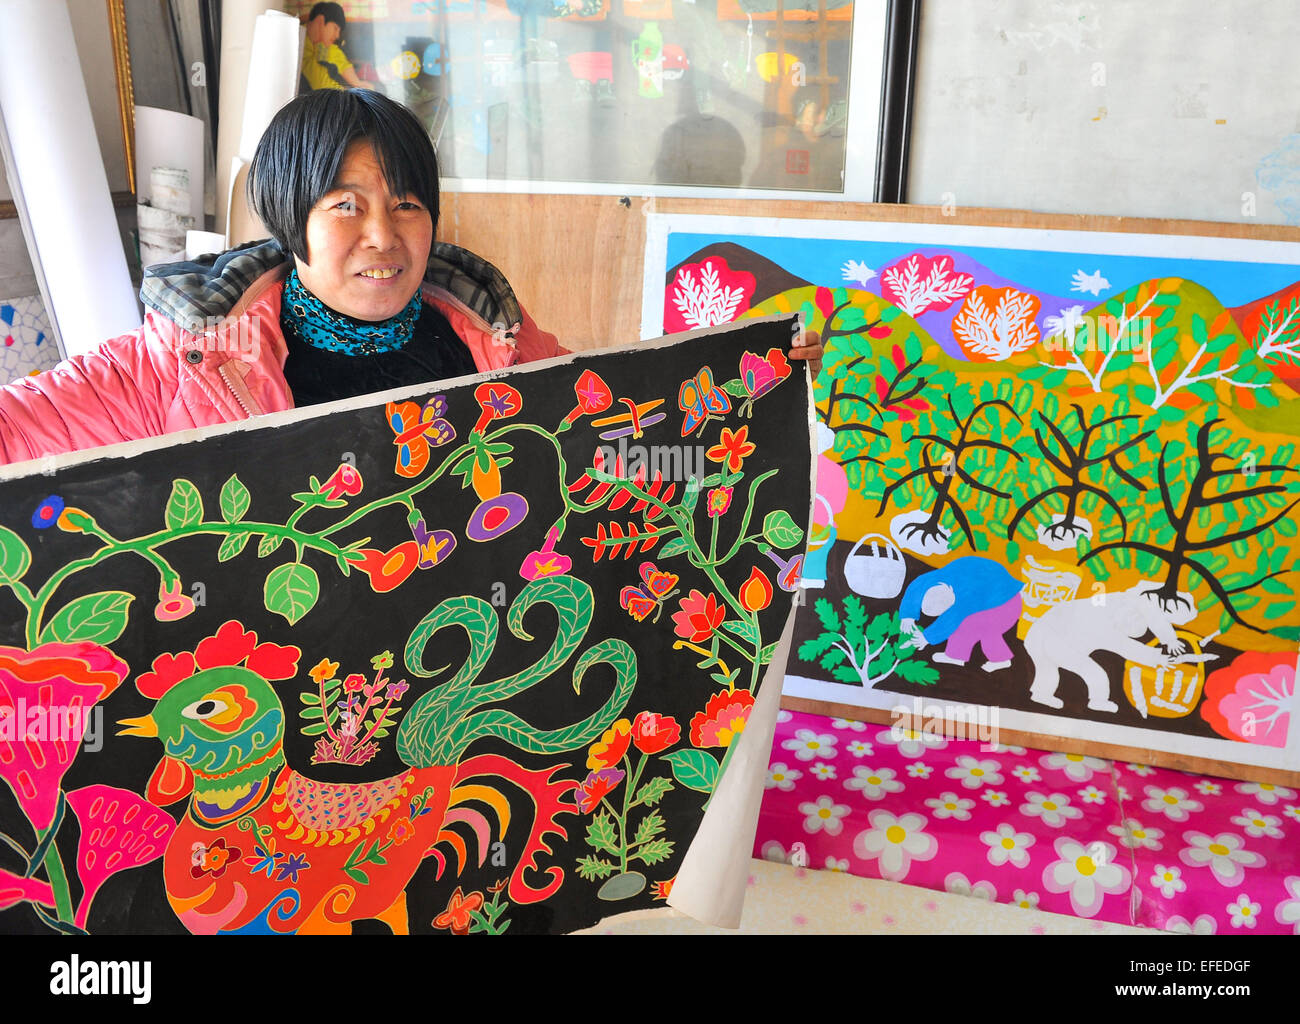 Dongfeng, China's Jilin Province. 2nd Feb, 2015. Wang Suling, a local villager, presents her country folk painting works at Wanlonghe Village in Dongfeng County, northeast China's Jilin Province, Feb. 2, 2015. The country folk painting of Dongfeng, which has the reputation as China's 'town of country folk painting', is famous for its strong local flavor in depicting life and folk-customs of northeast China's rural area. © Zhao Mengzhuo/Xinhua/Alamy Live News Stock Photo